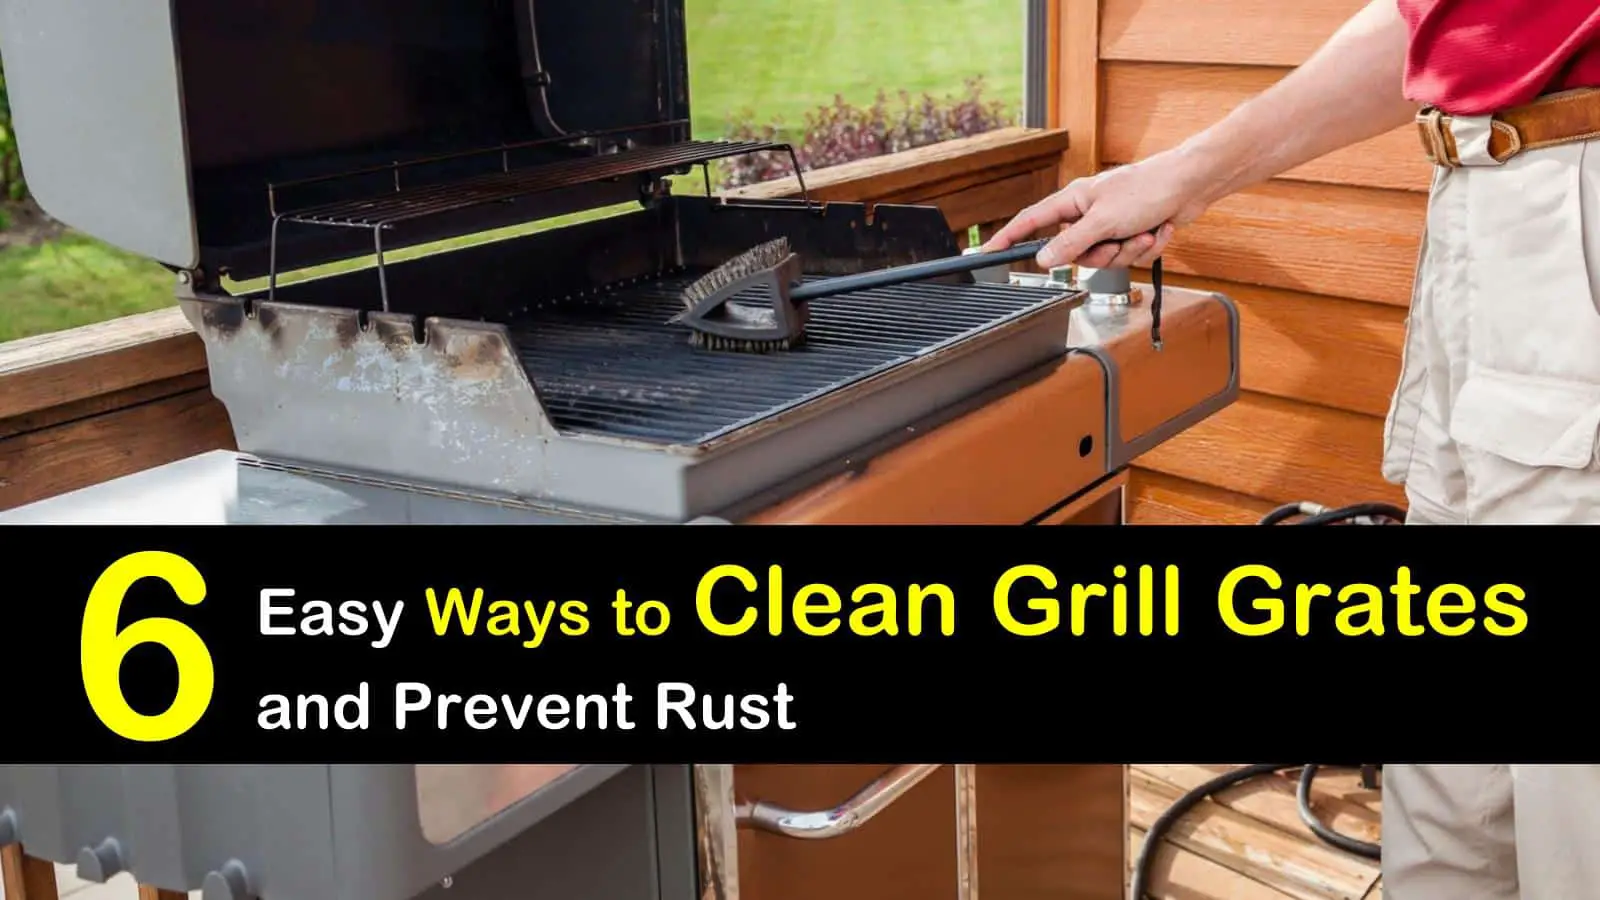 6 Easy Ways to Clean Grill Grates and Prevent Rust